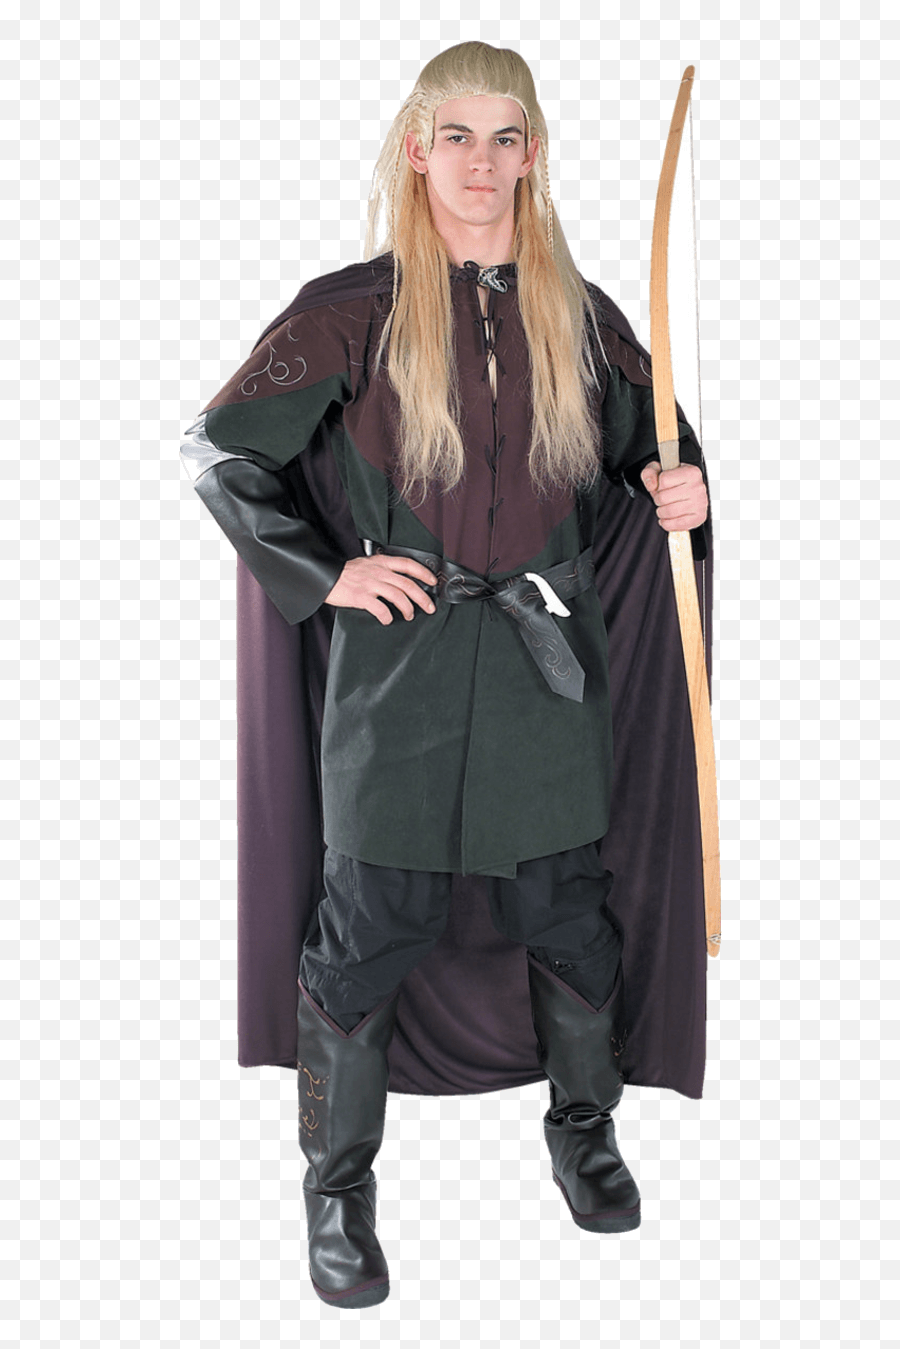 Hd Png Download - Lord Of The Rings Costume,Legolas Png